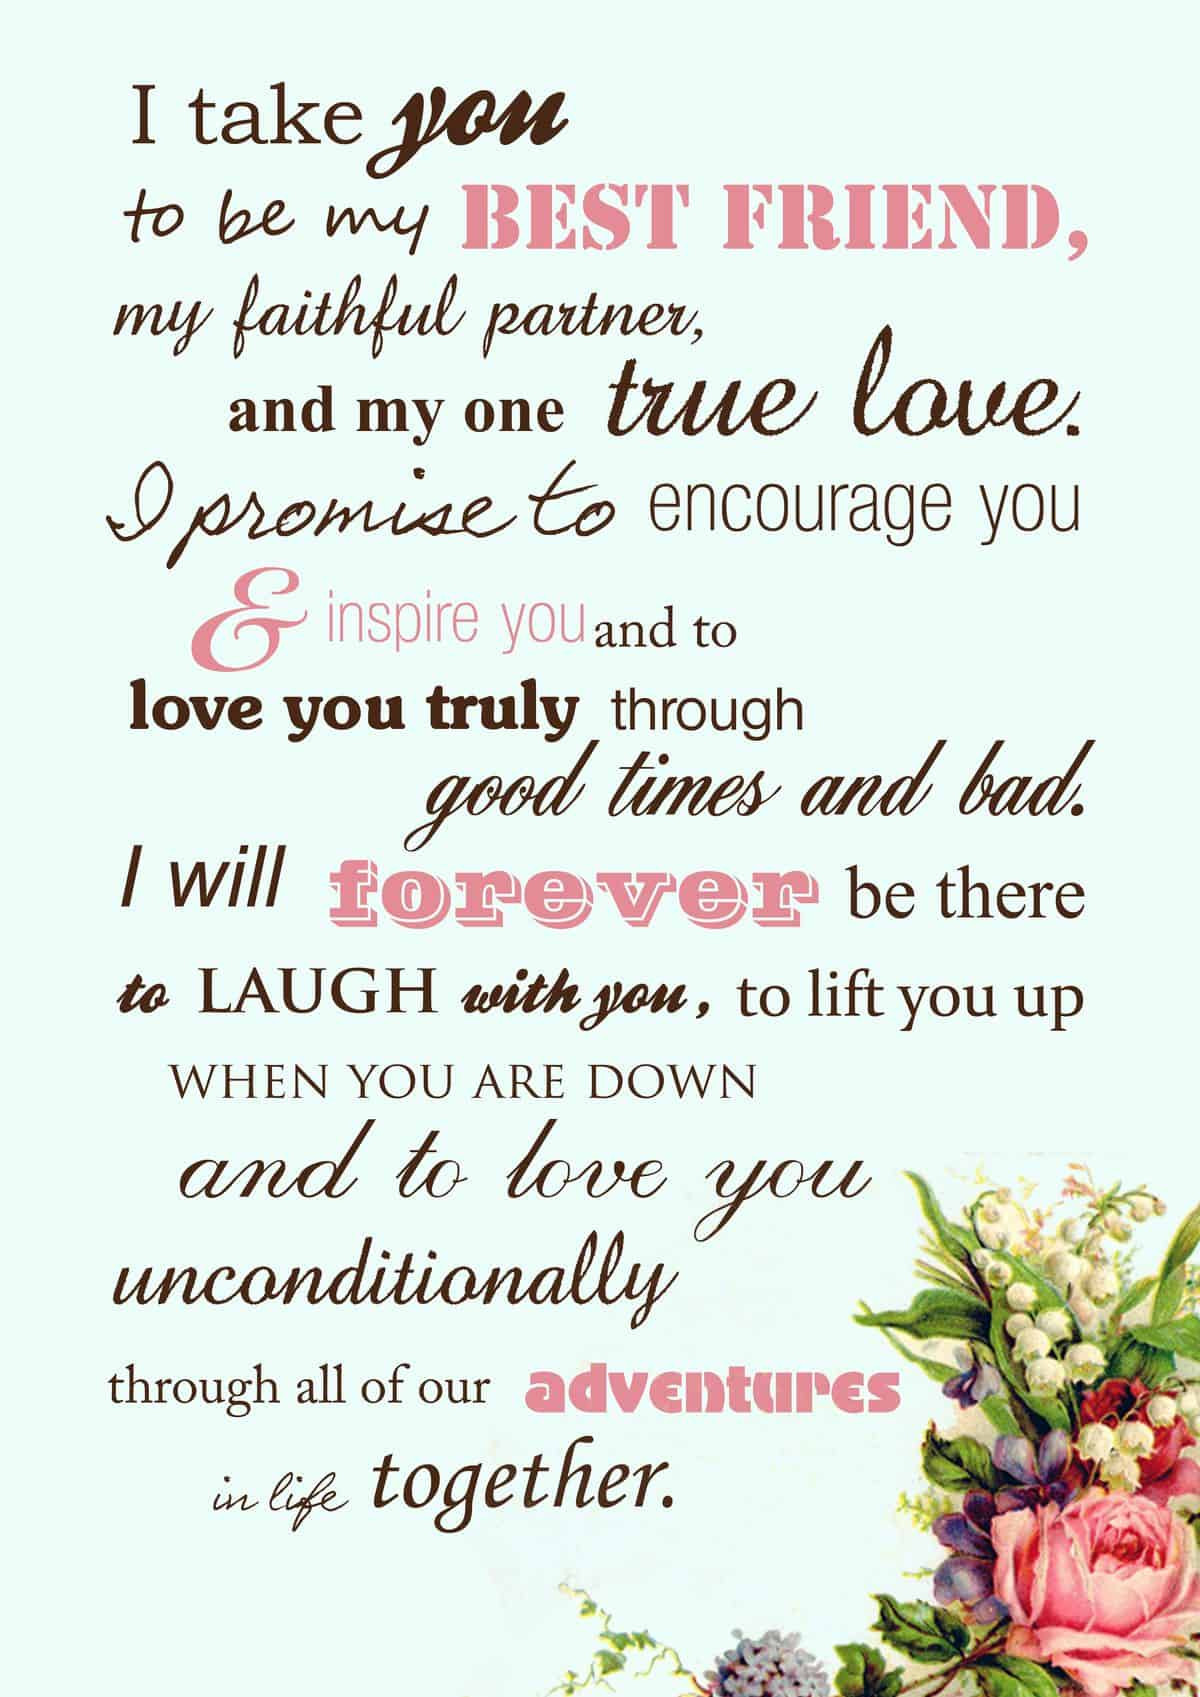 Best Wedding Vows Examples
 traditional wedding vows best photos Cute Wedding Ideas